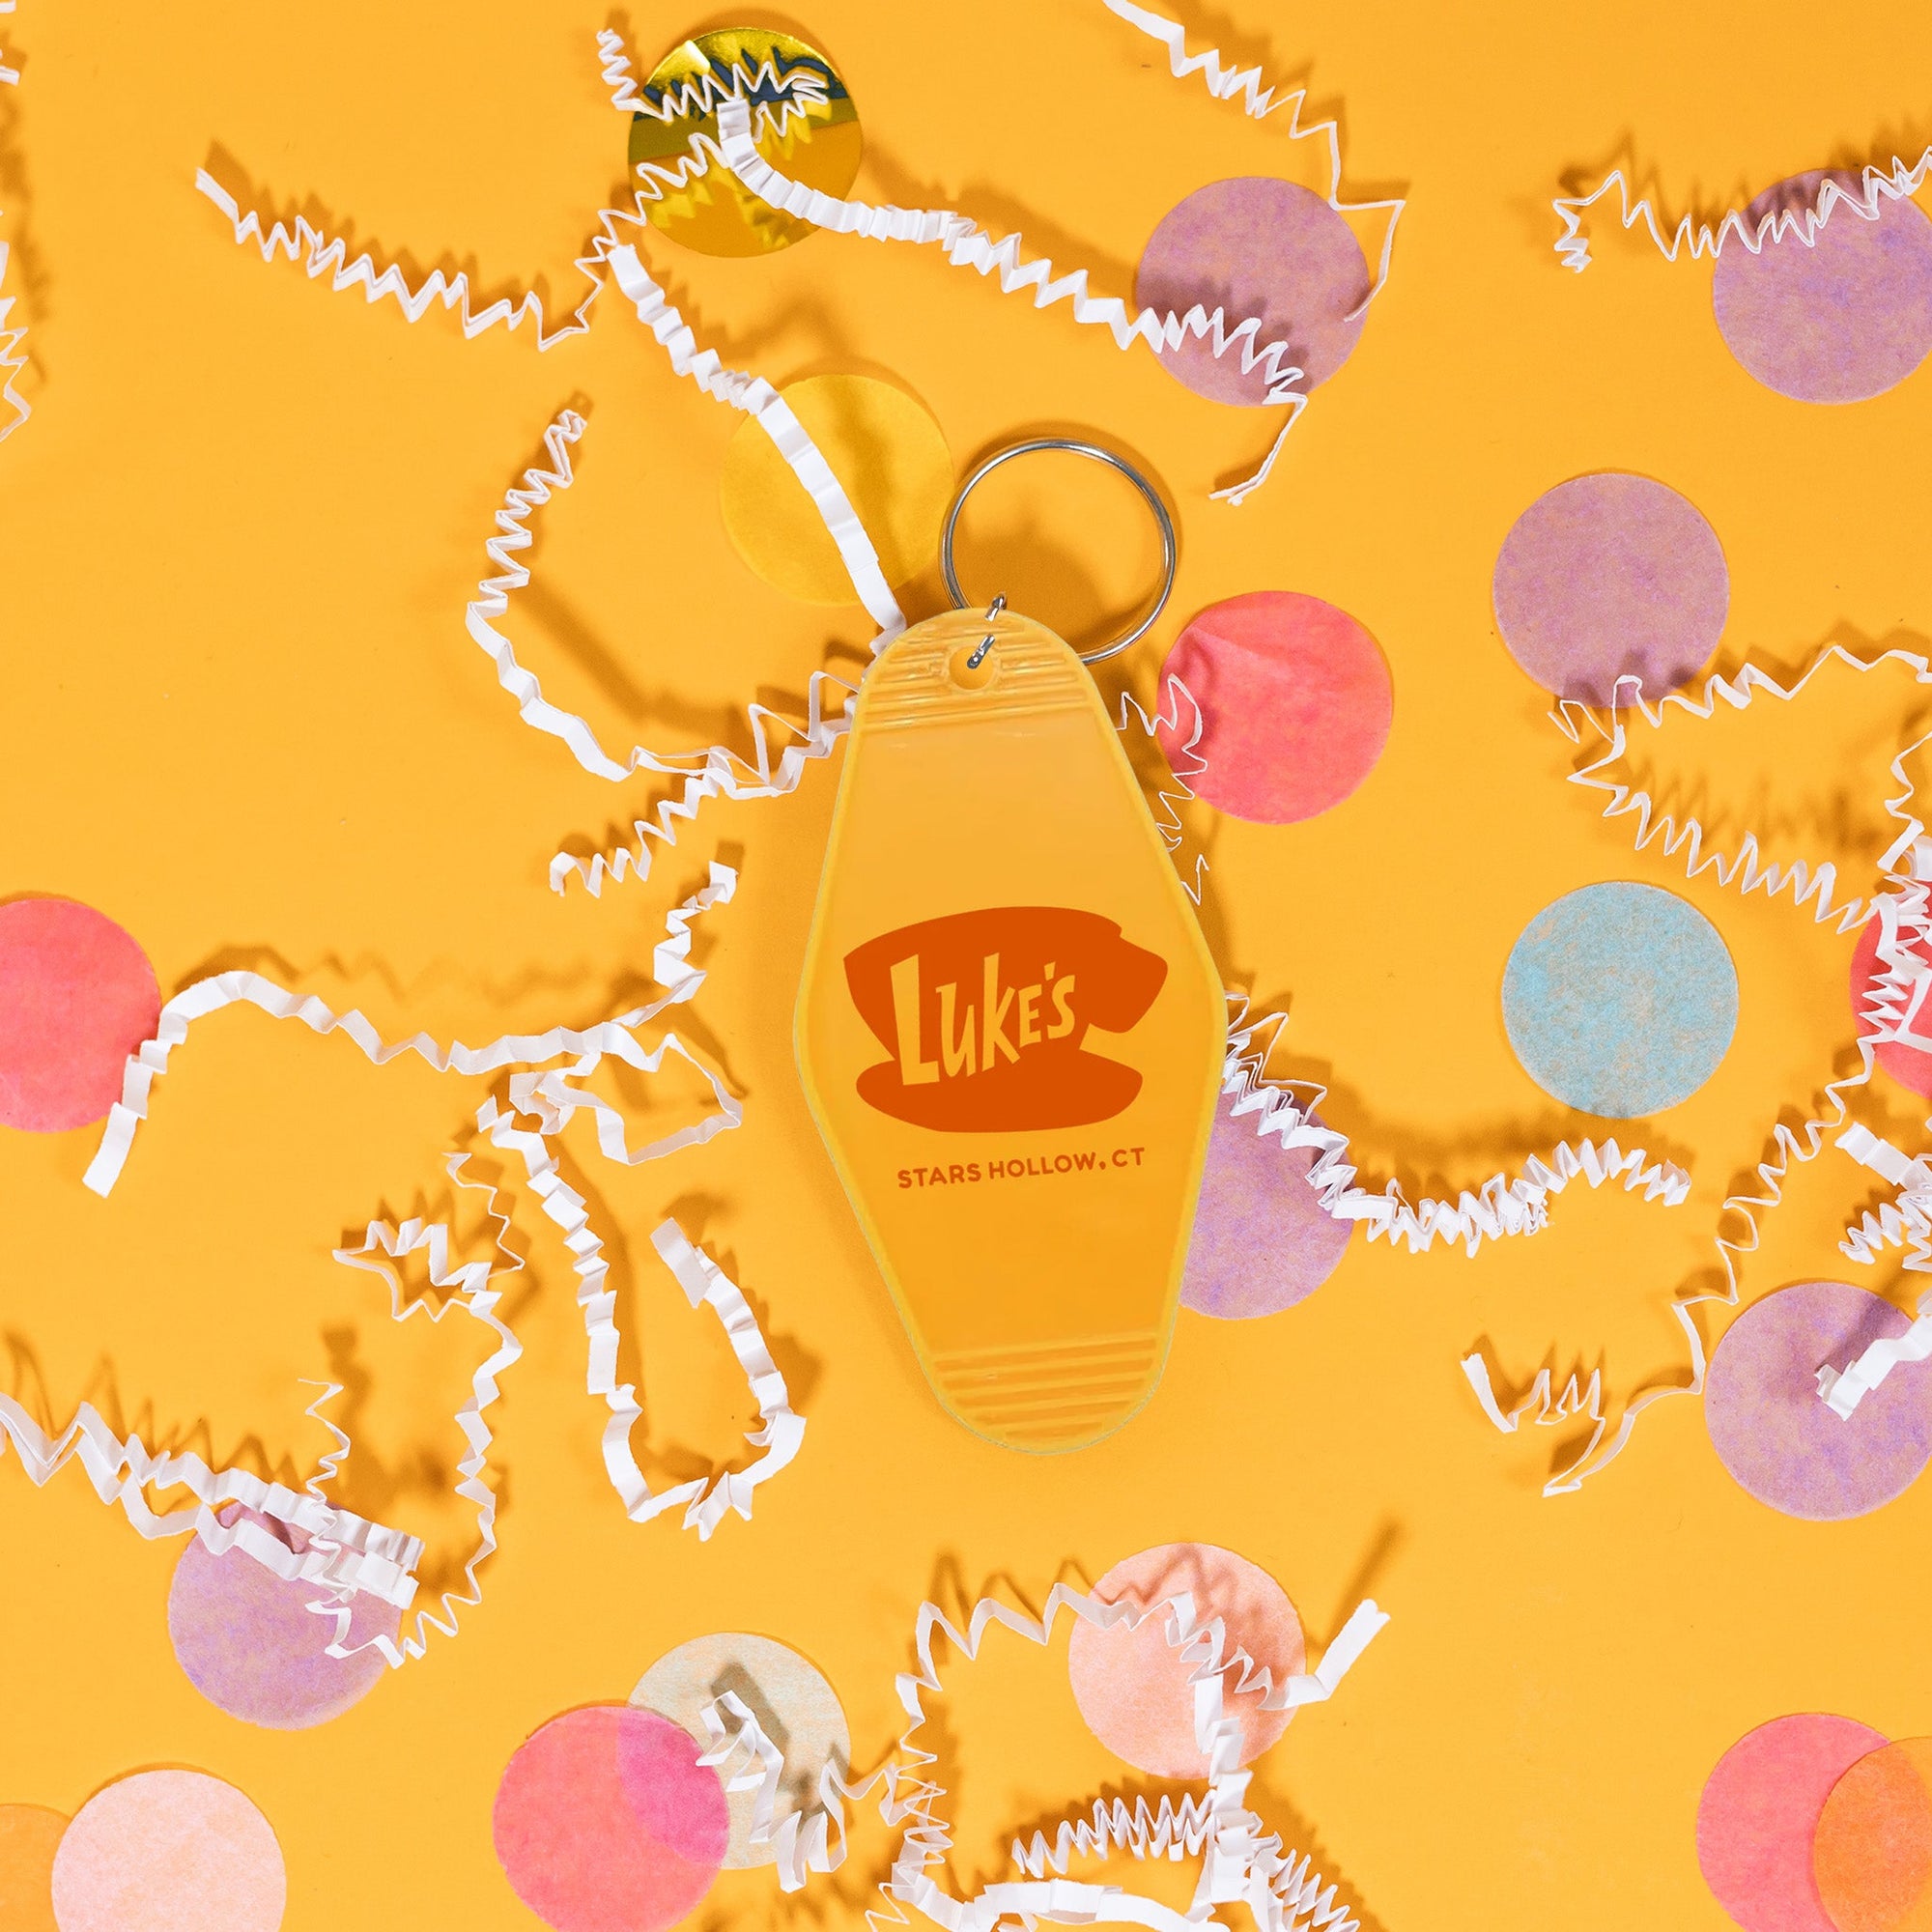 On a sunny mustard background sits a key chain with white crinkle and big, colorful confetti scattered around. This Gilmore Girls inspired mustard yellow vintage hotel key chain has a red illustration of Luke's Stars Hollow.